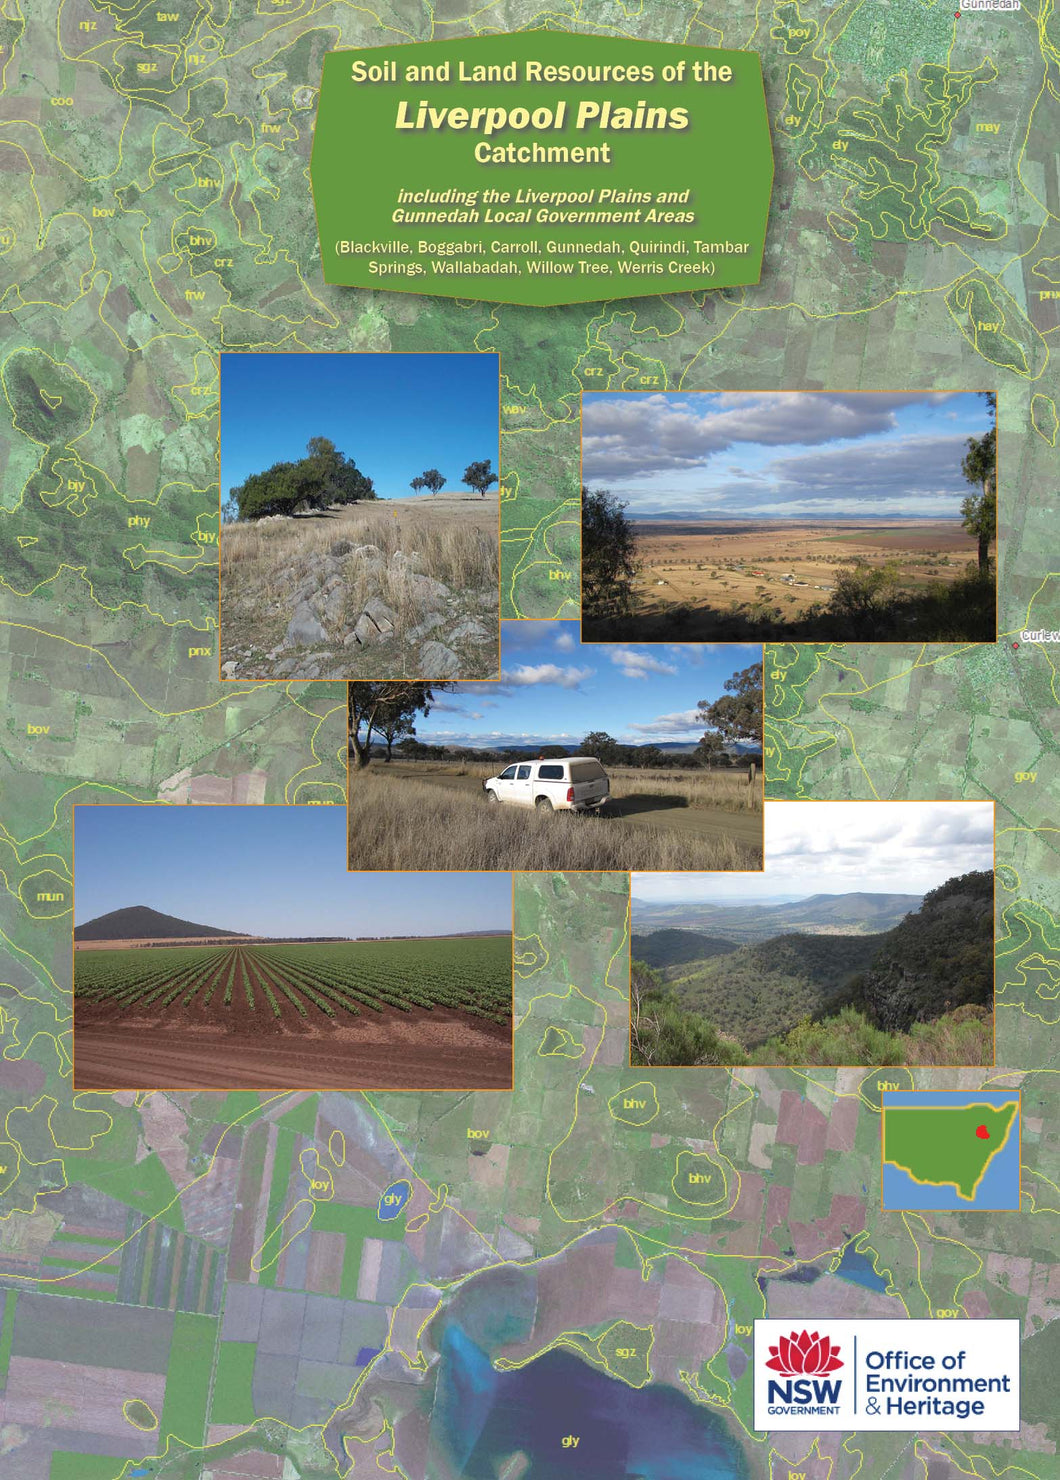 Soil and Land Resources of the Liverpool Plains Catchment